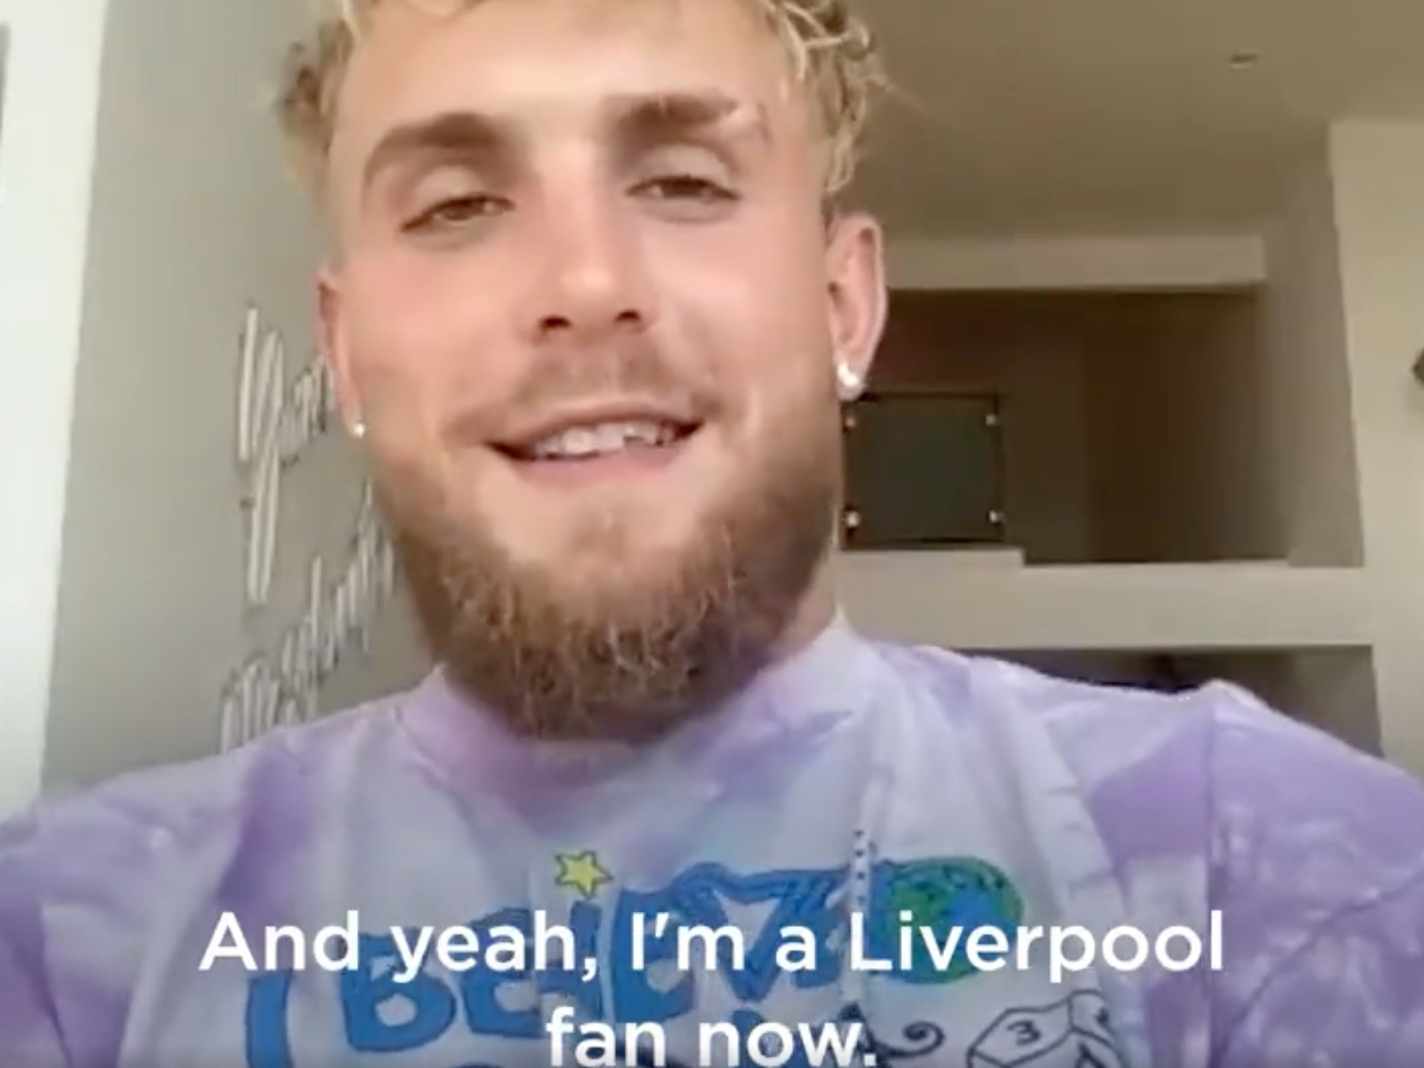 Jake Paul Reveals His Liverpool Fandom In The Most Obnoxious Way Possible